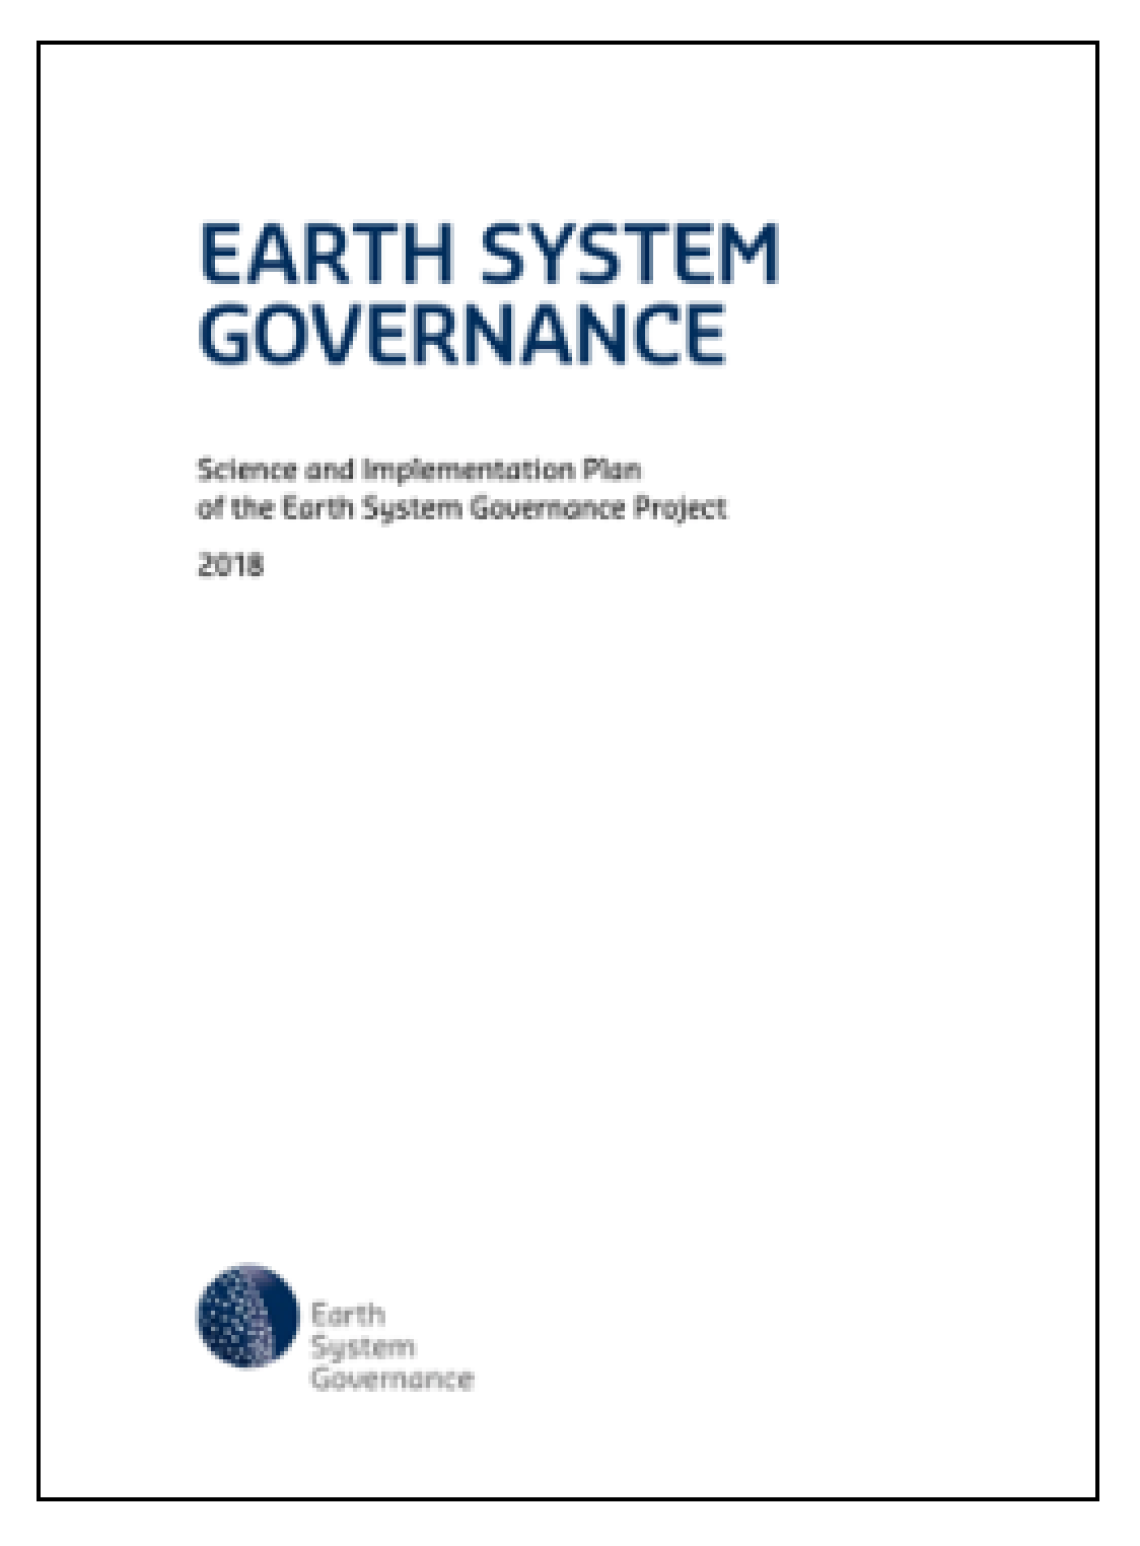 Cover of the 2018 Earth System Governance Science and Implementation Plan